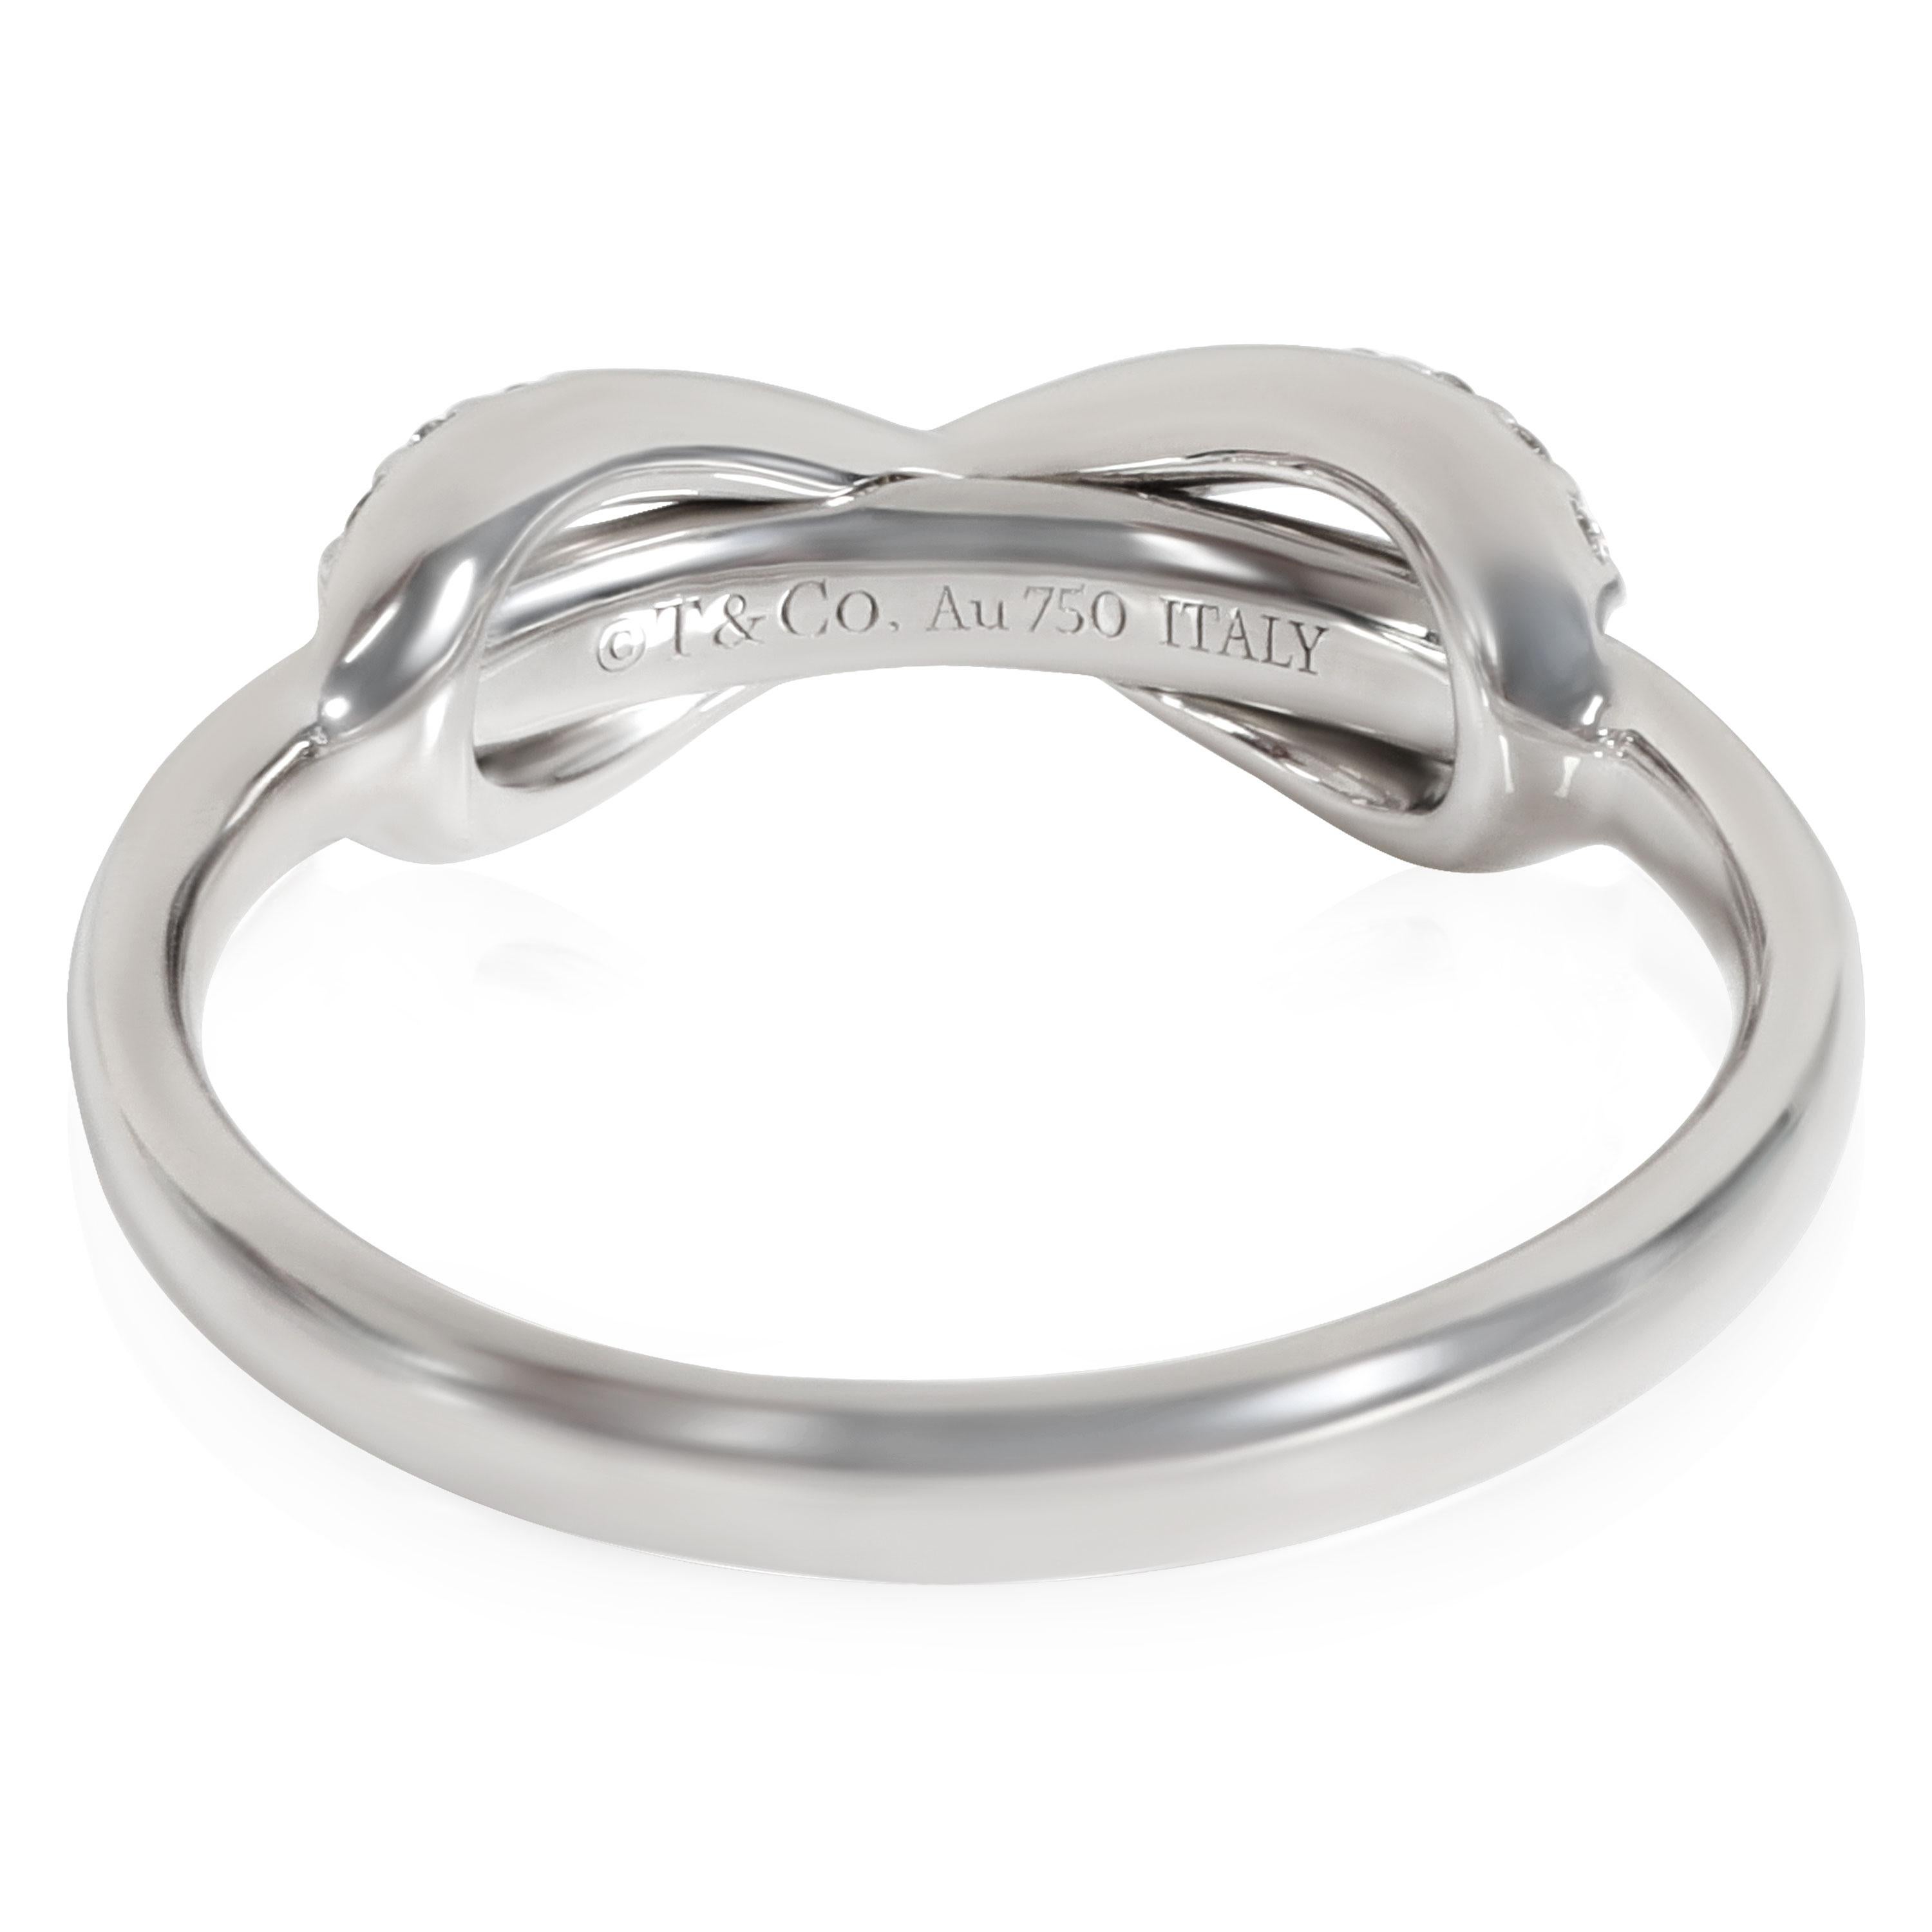 Tiffany & Co. Infinity Diamond Ring in 18k White Gold 0.13 CTW

PRIMARY DETAILS
SKU: 114299
Listing Title: Tiffany & Co. Infinity Diamond Ring in 18k White Gold 0.13 CTW
Condition Description: Retails for 2800 USD. In excellent condition and